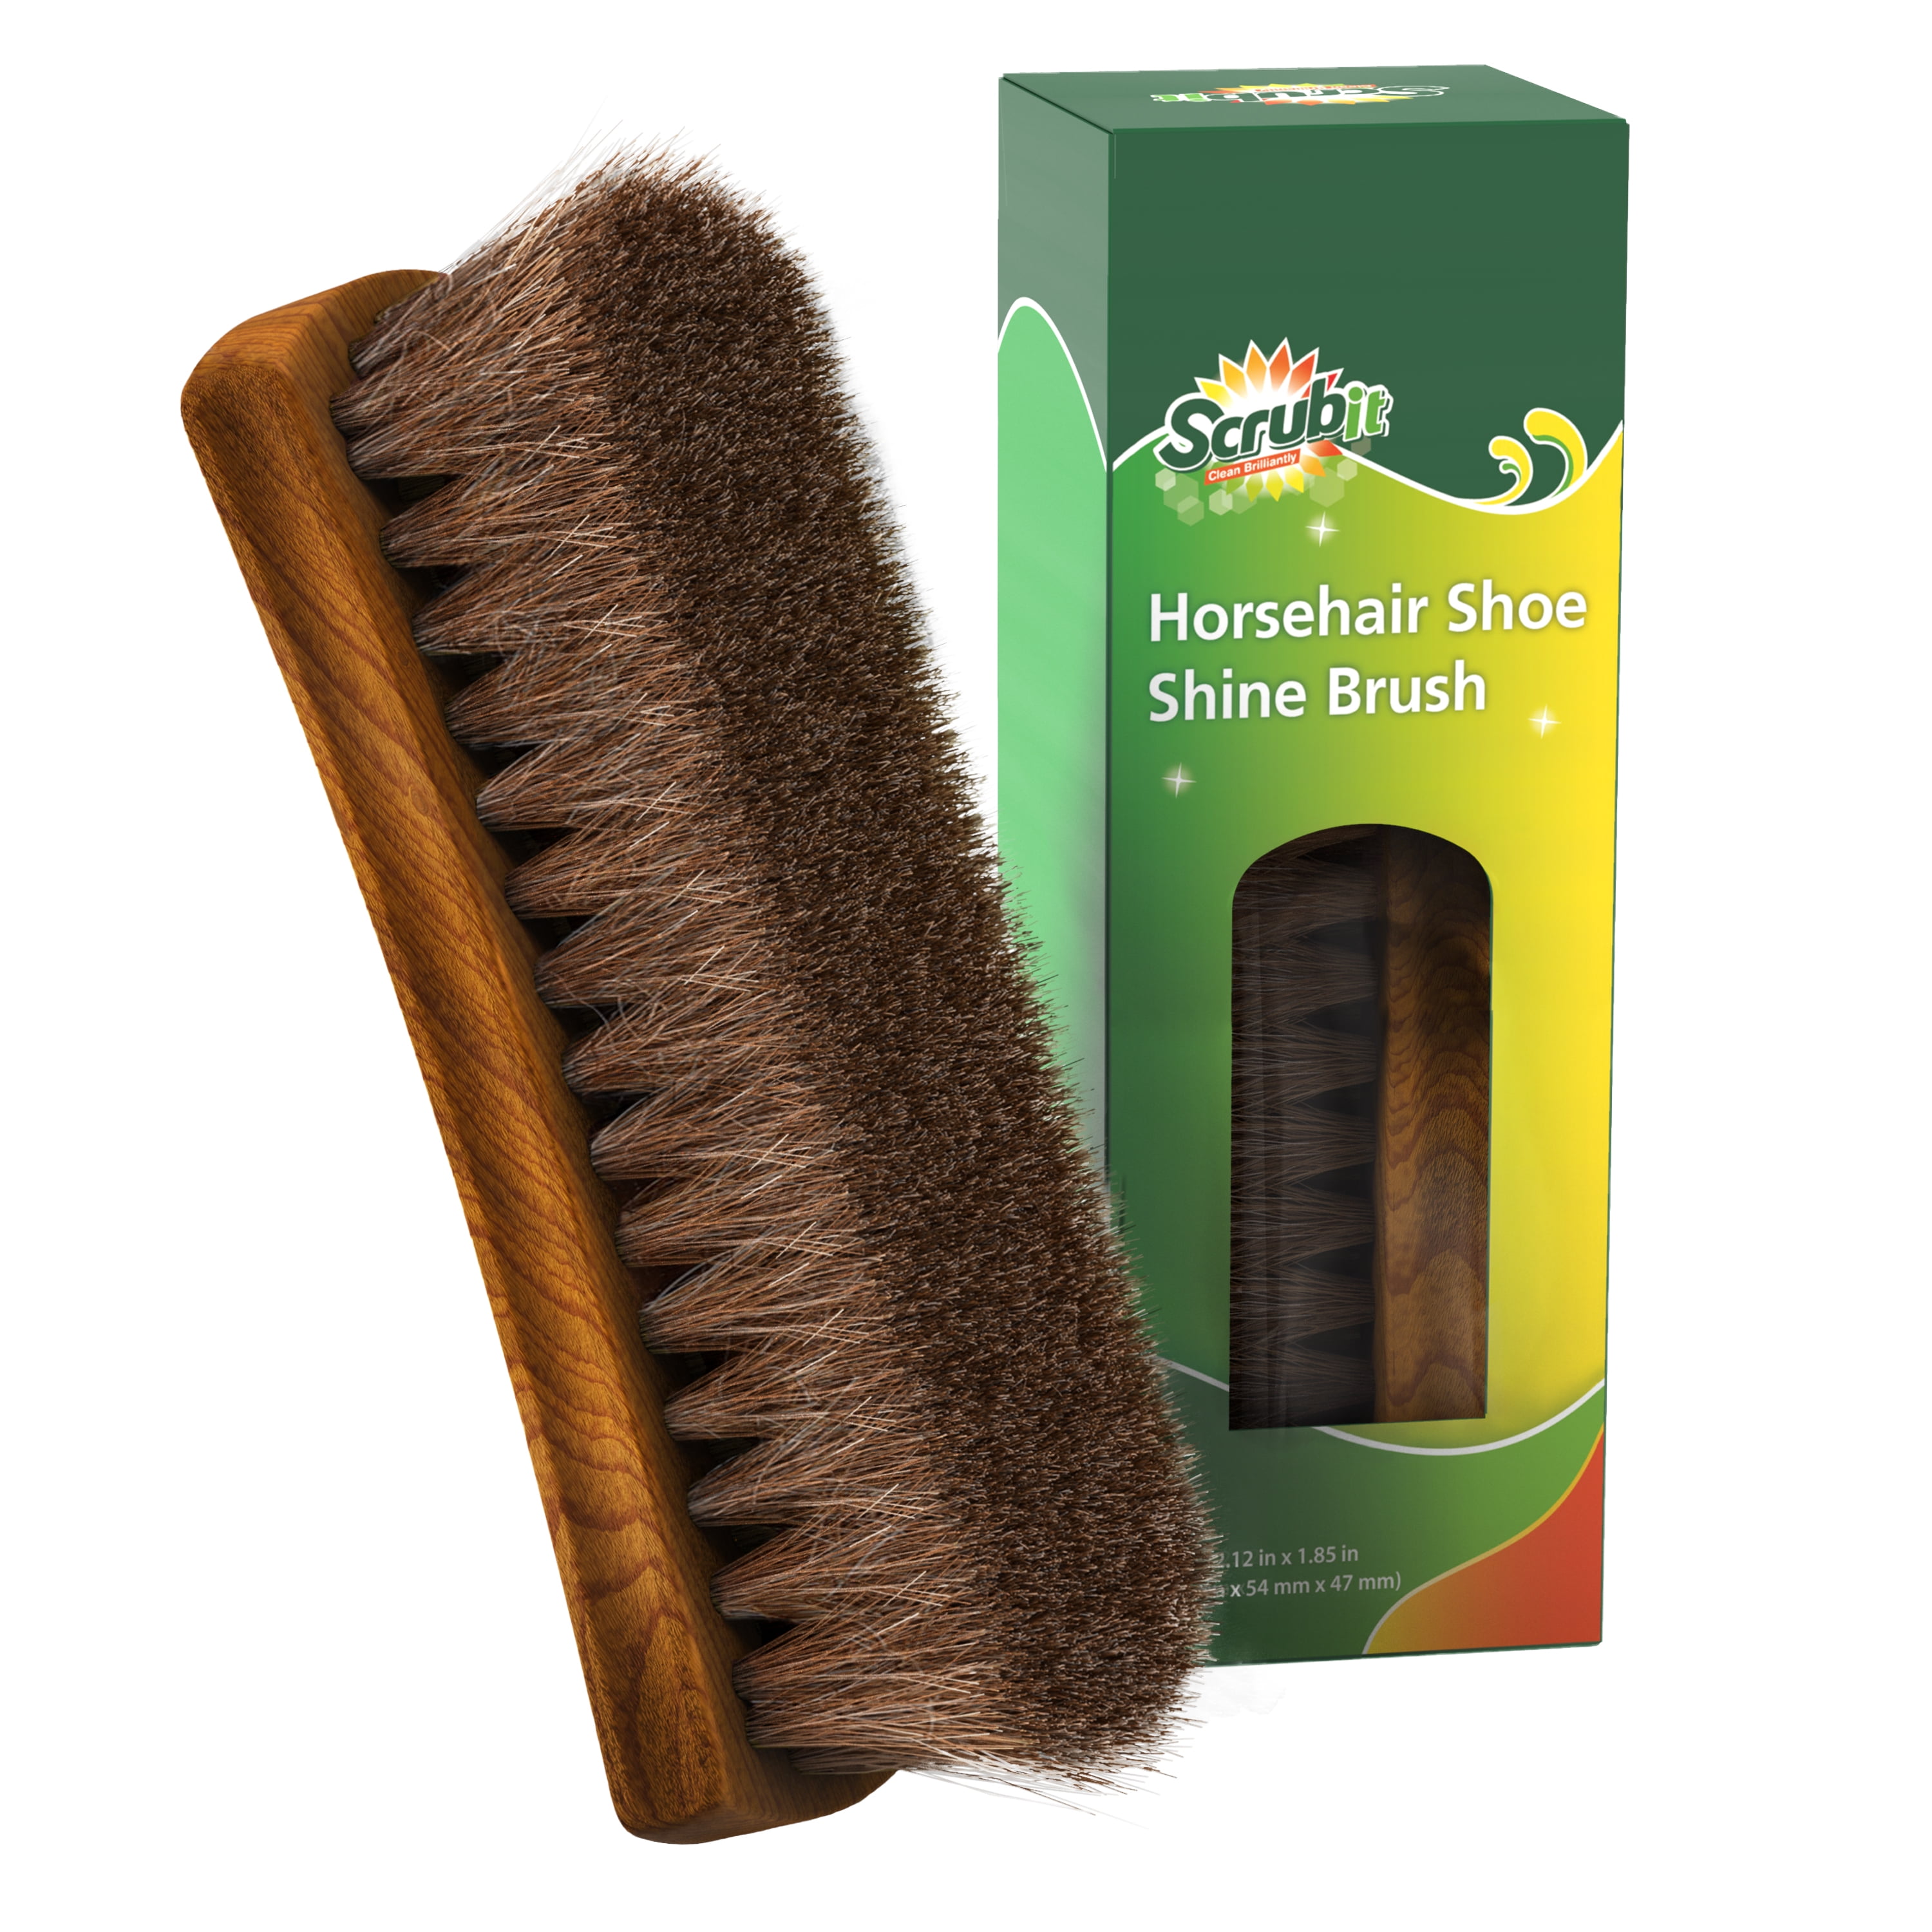 Horsehair Shoe Brush For Buffing Quality Footwear Shoes Boots Wooden Handle x 2 